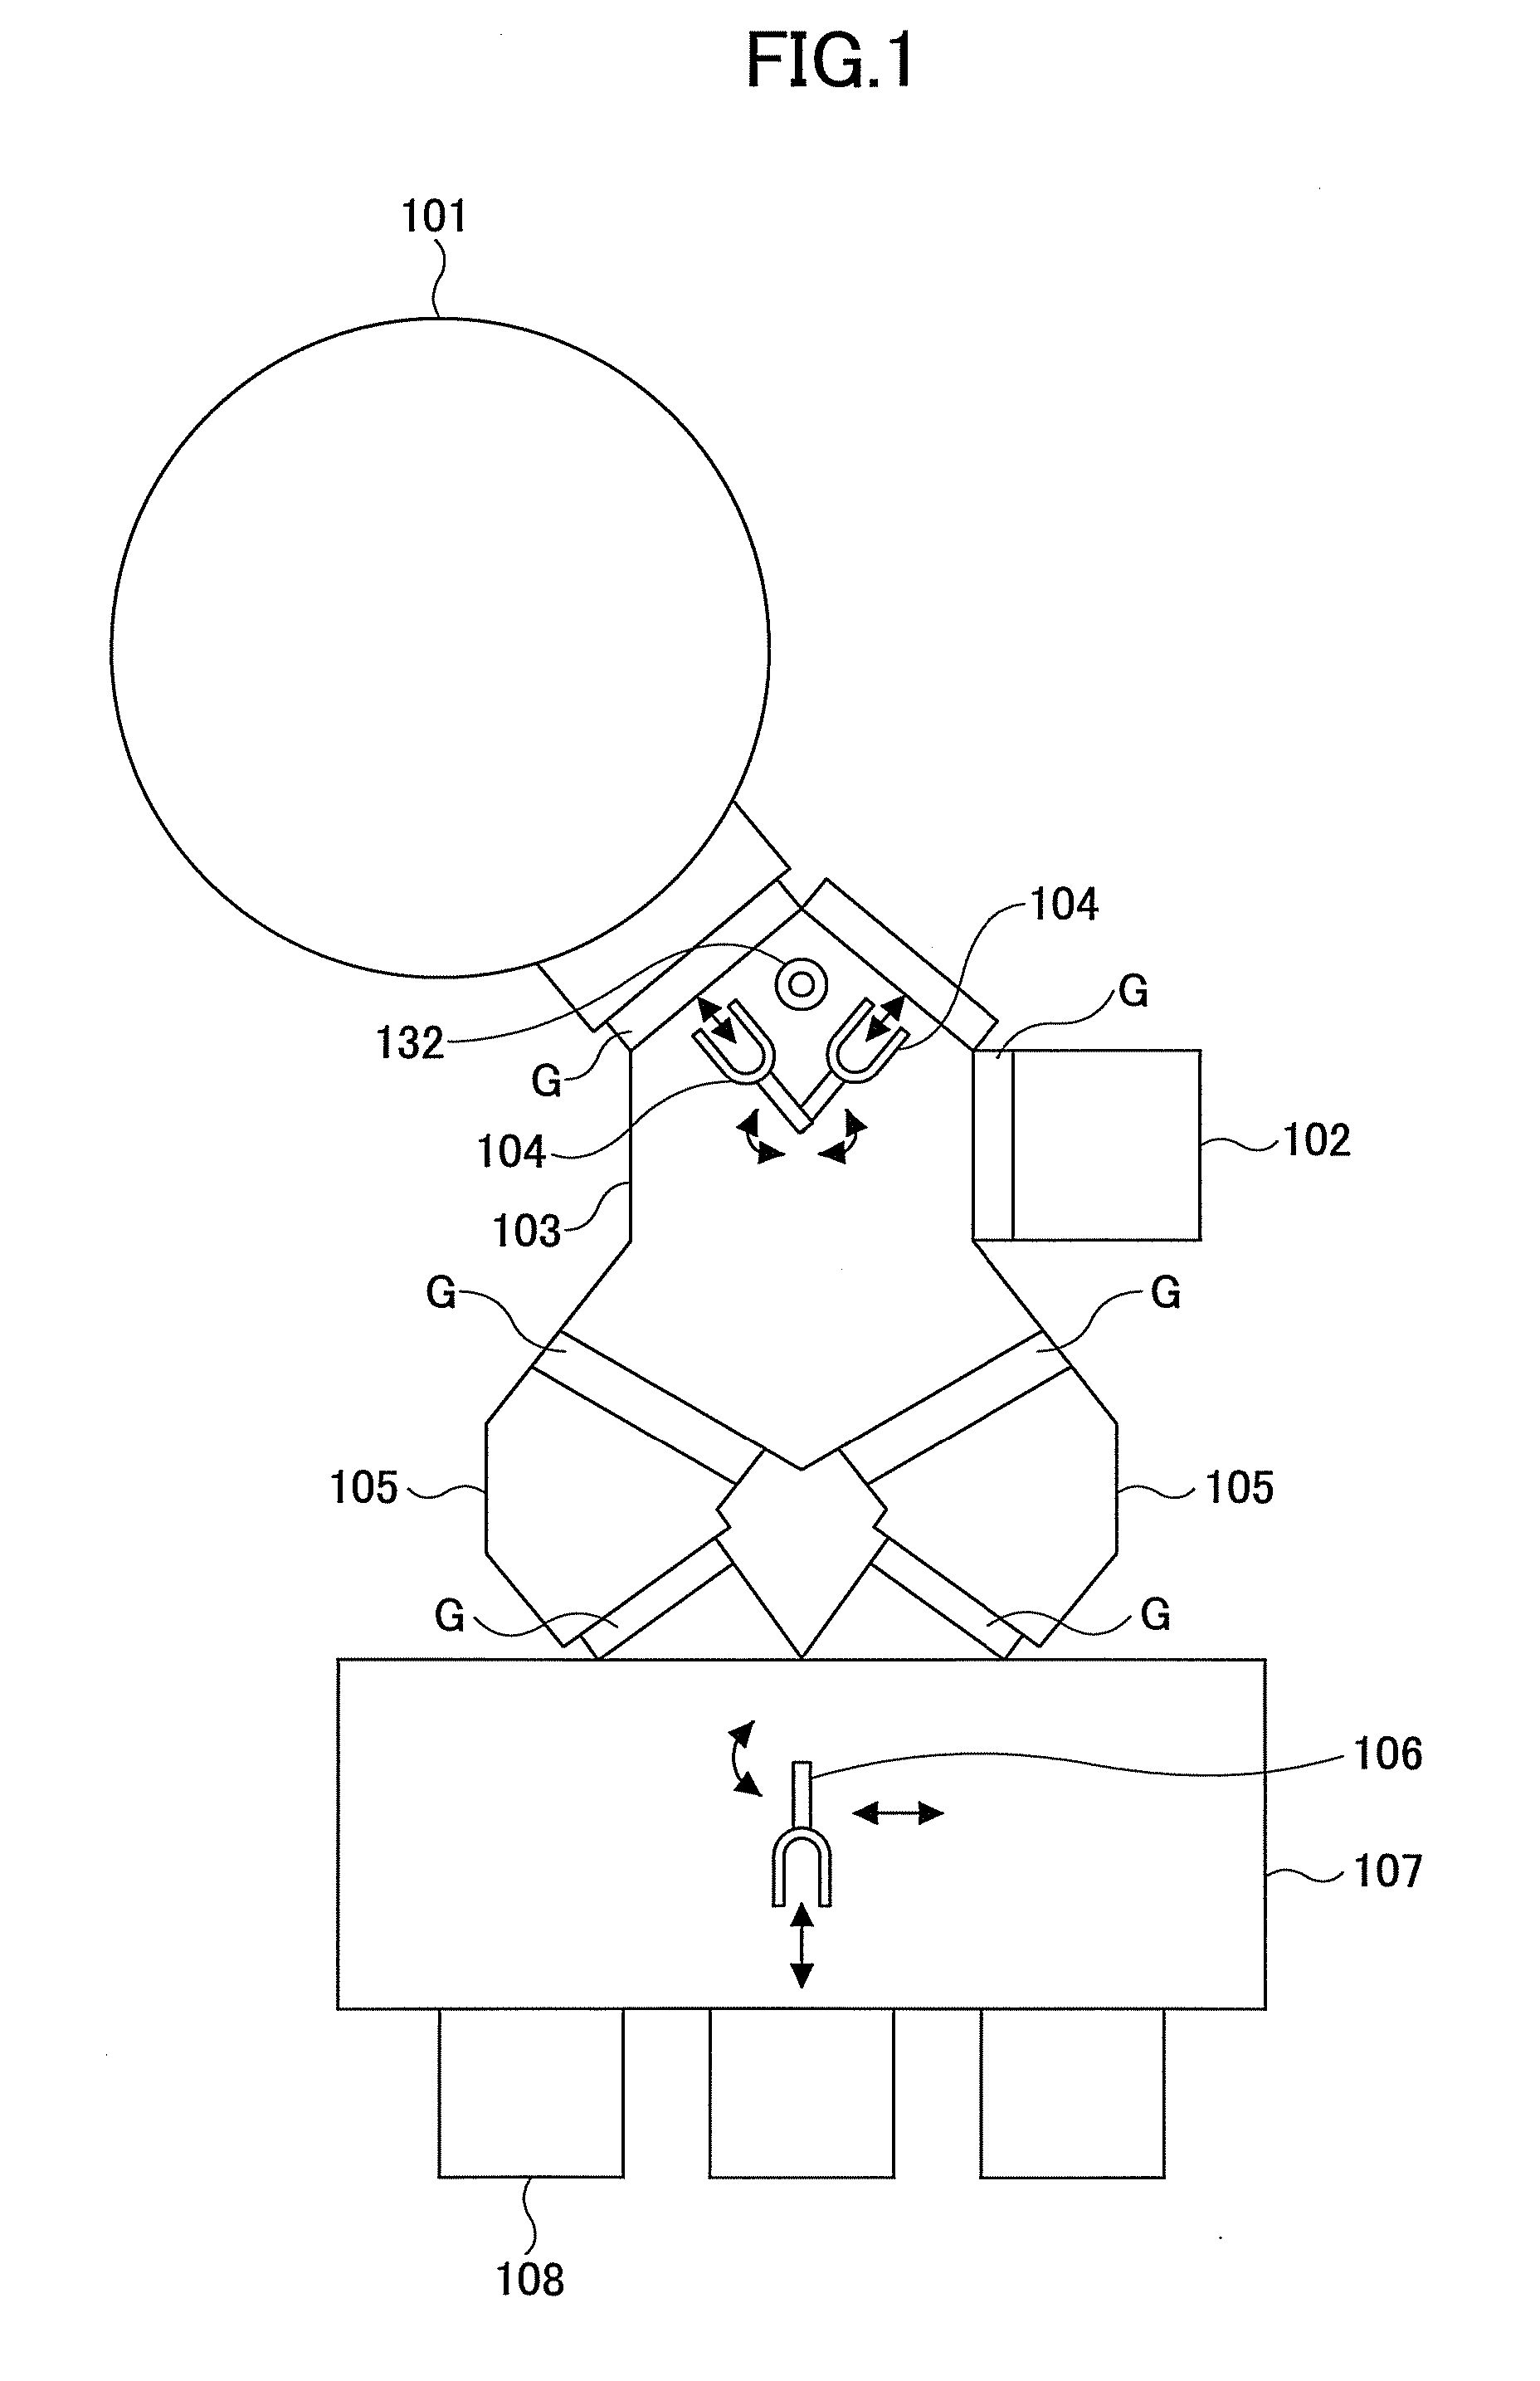 Substrate processing apparatus, substrate processing method, and computer-readable storage medium